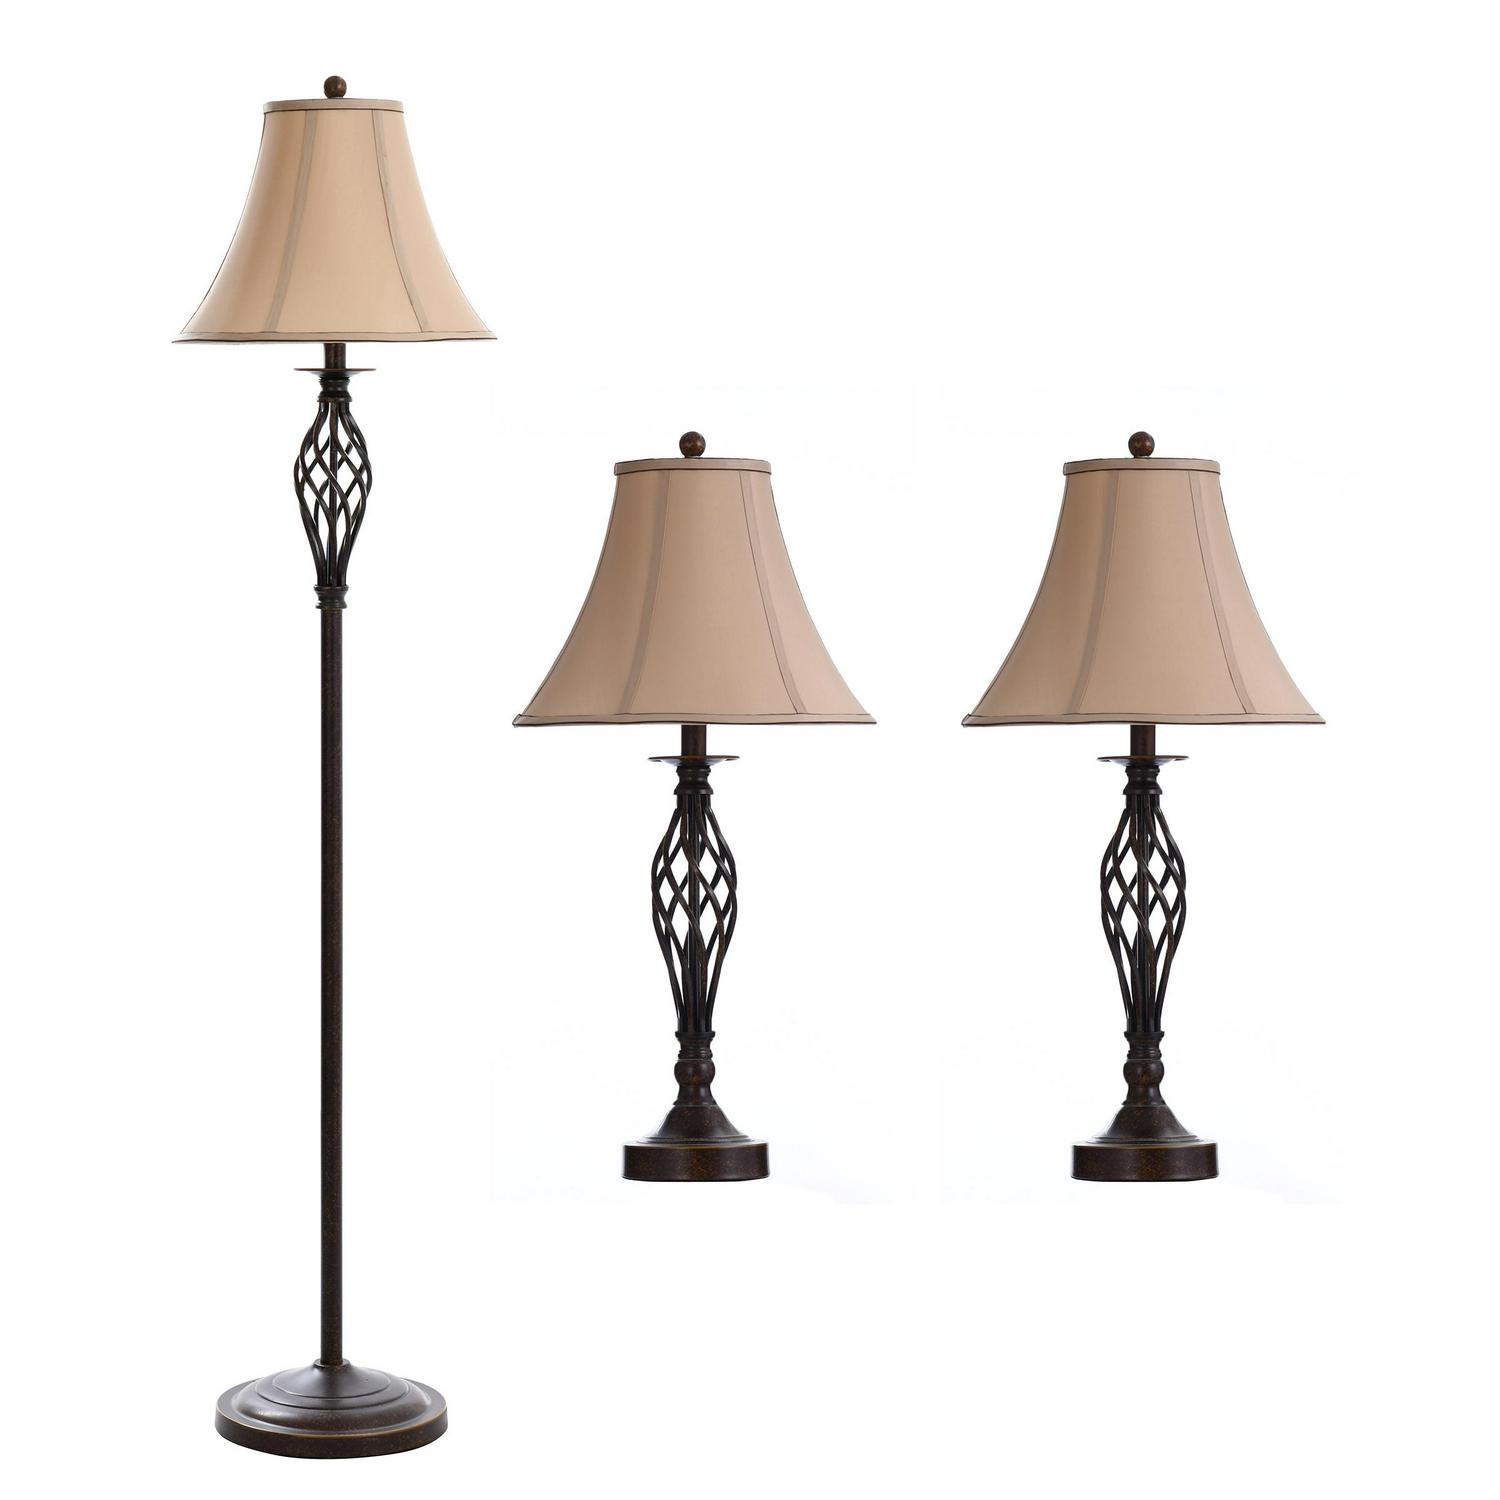 Barclay Table Lamp  Brass Finish  White Silk Shade  Set Of 3: 2 Table， 1 Floor